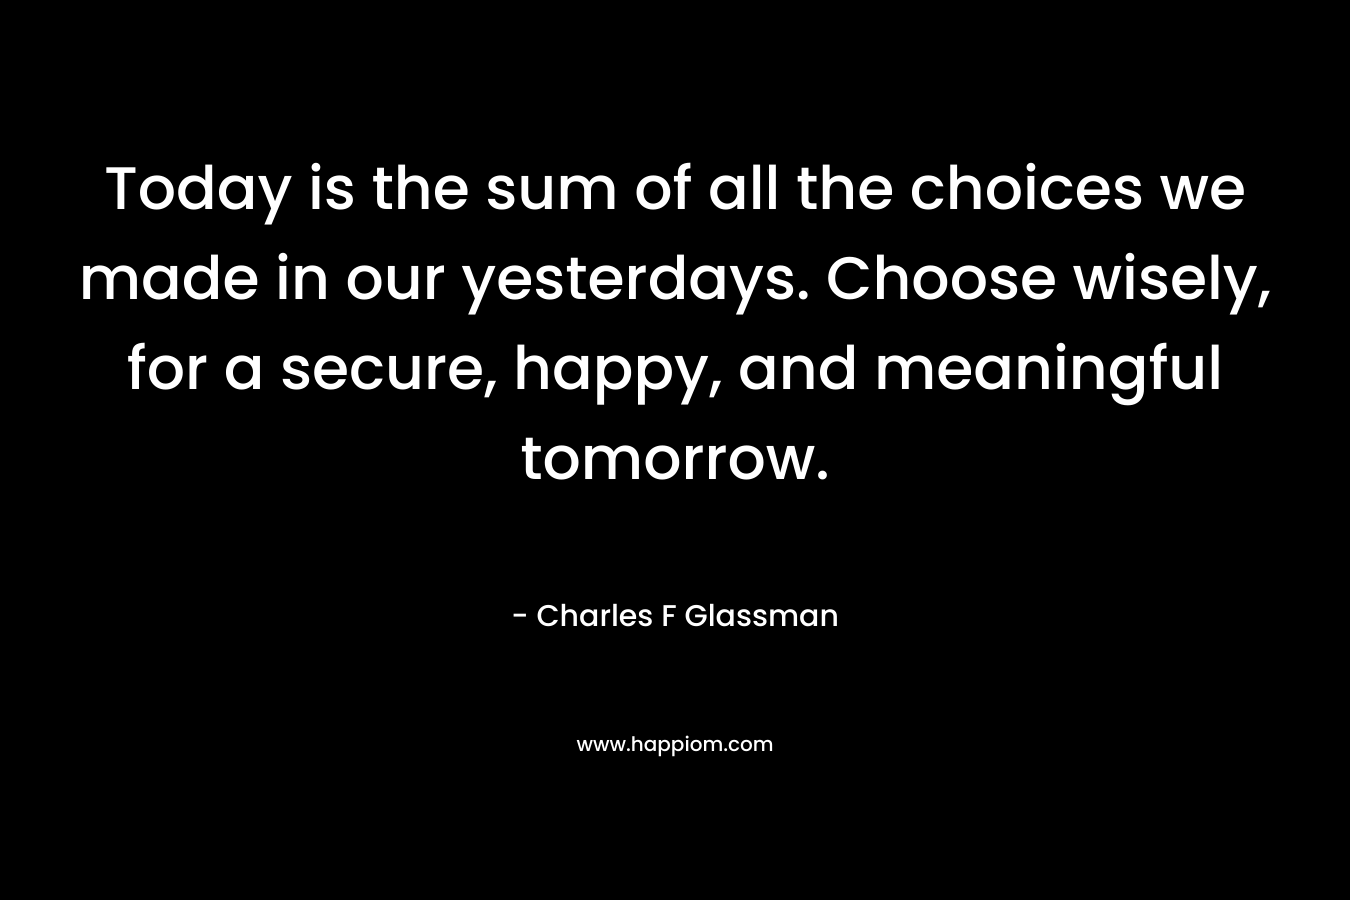 Today is the sum of all the choices we made in our yesterdays. Choose wisely, for a secure, happy, and meaningful tomorrow. – Charles F Glassman